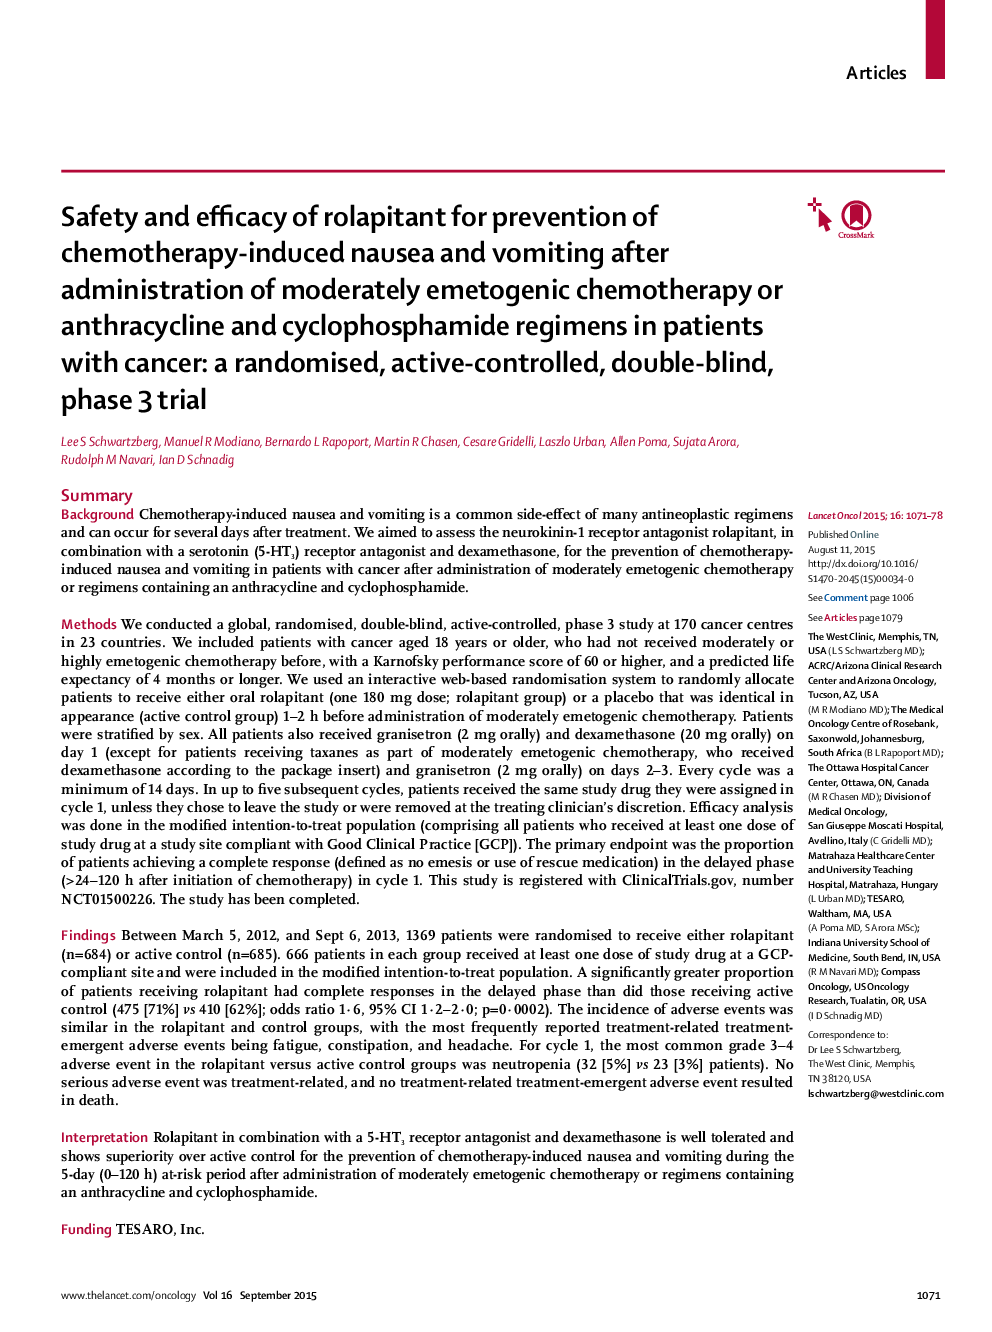 Safety and efficacy of rolapitant for prevention of chemotherapy-induced nausea and vomiting after administration of moderately emetogenic chemotherapy or anthracycline and cyclophosphamide regimens in patients with cancer: a randomised, active-controlled